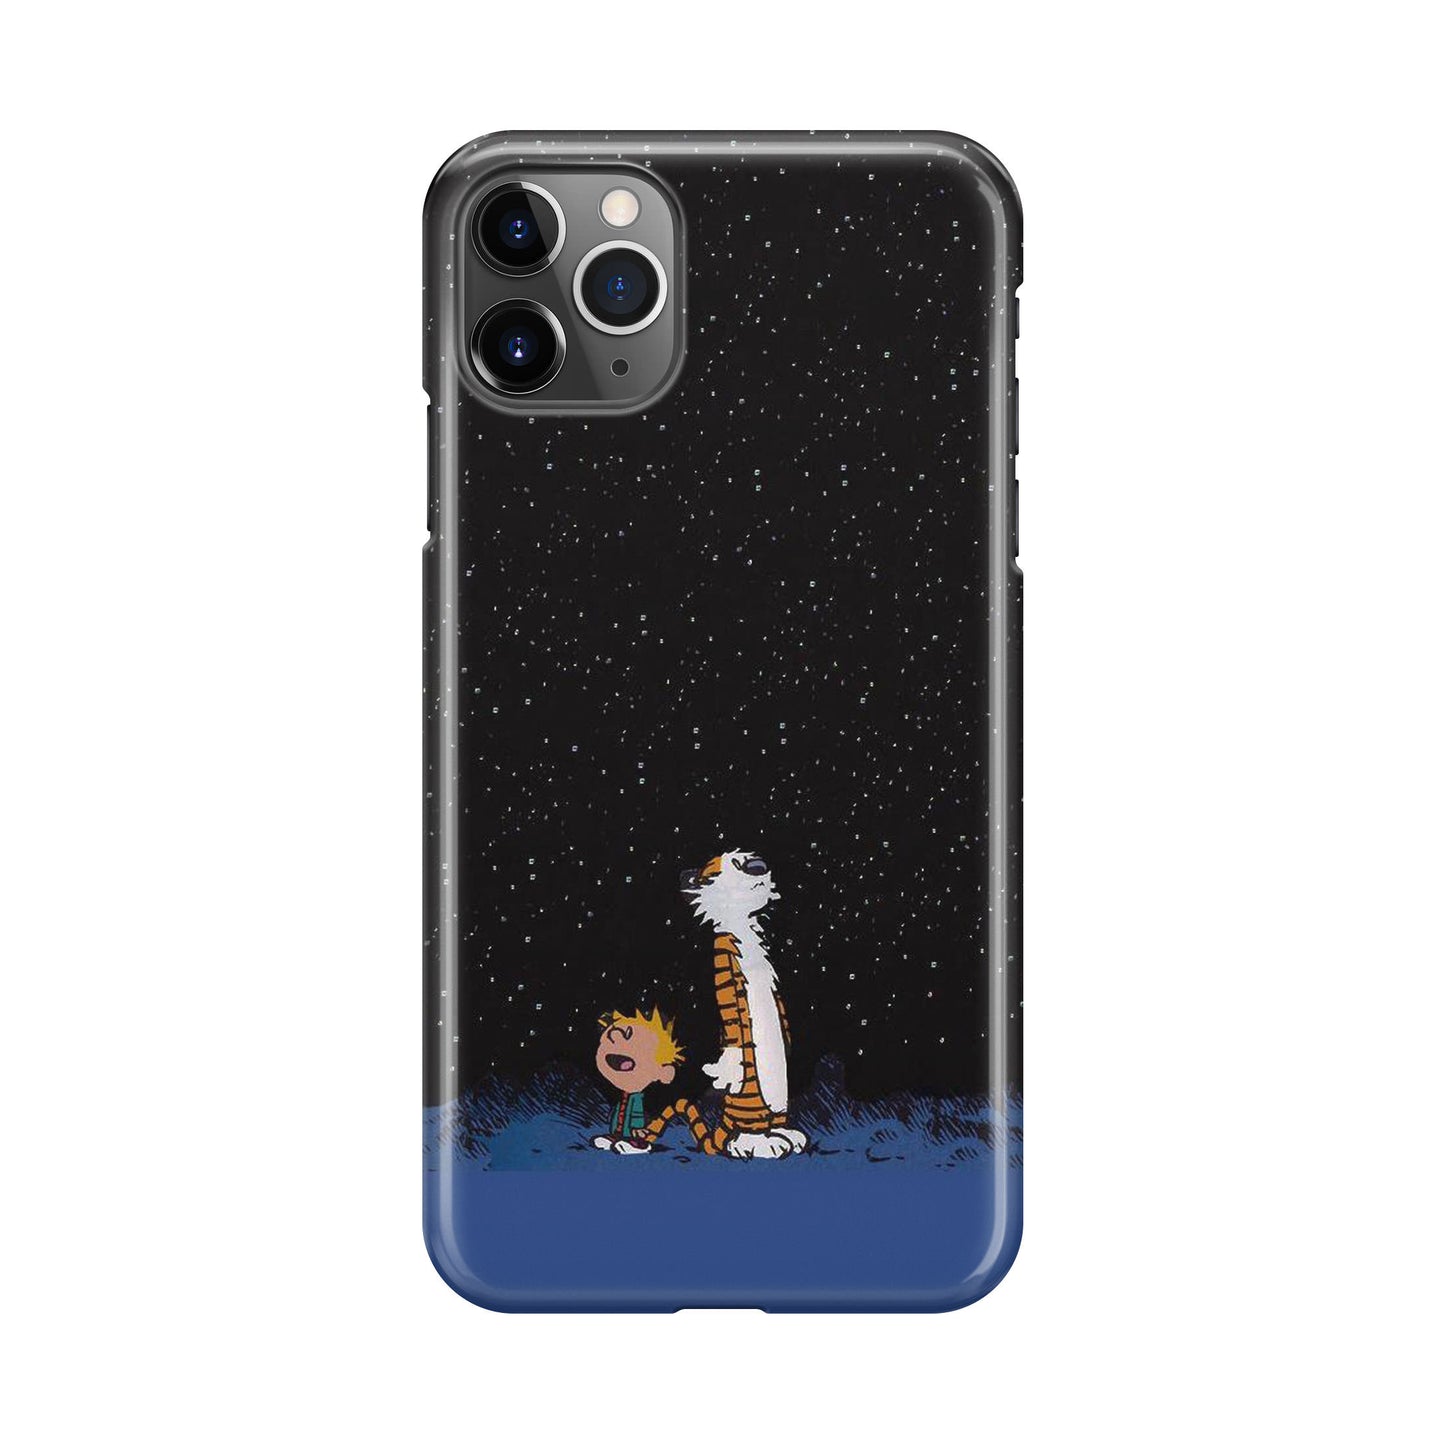 Calvin and Hobbes Space iPhone 11 Pro Max Case